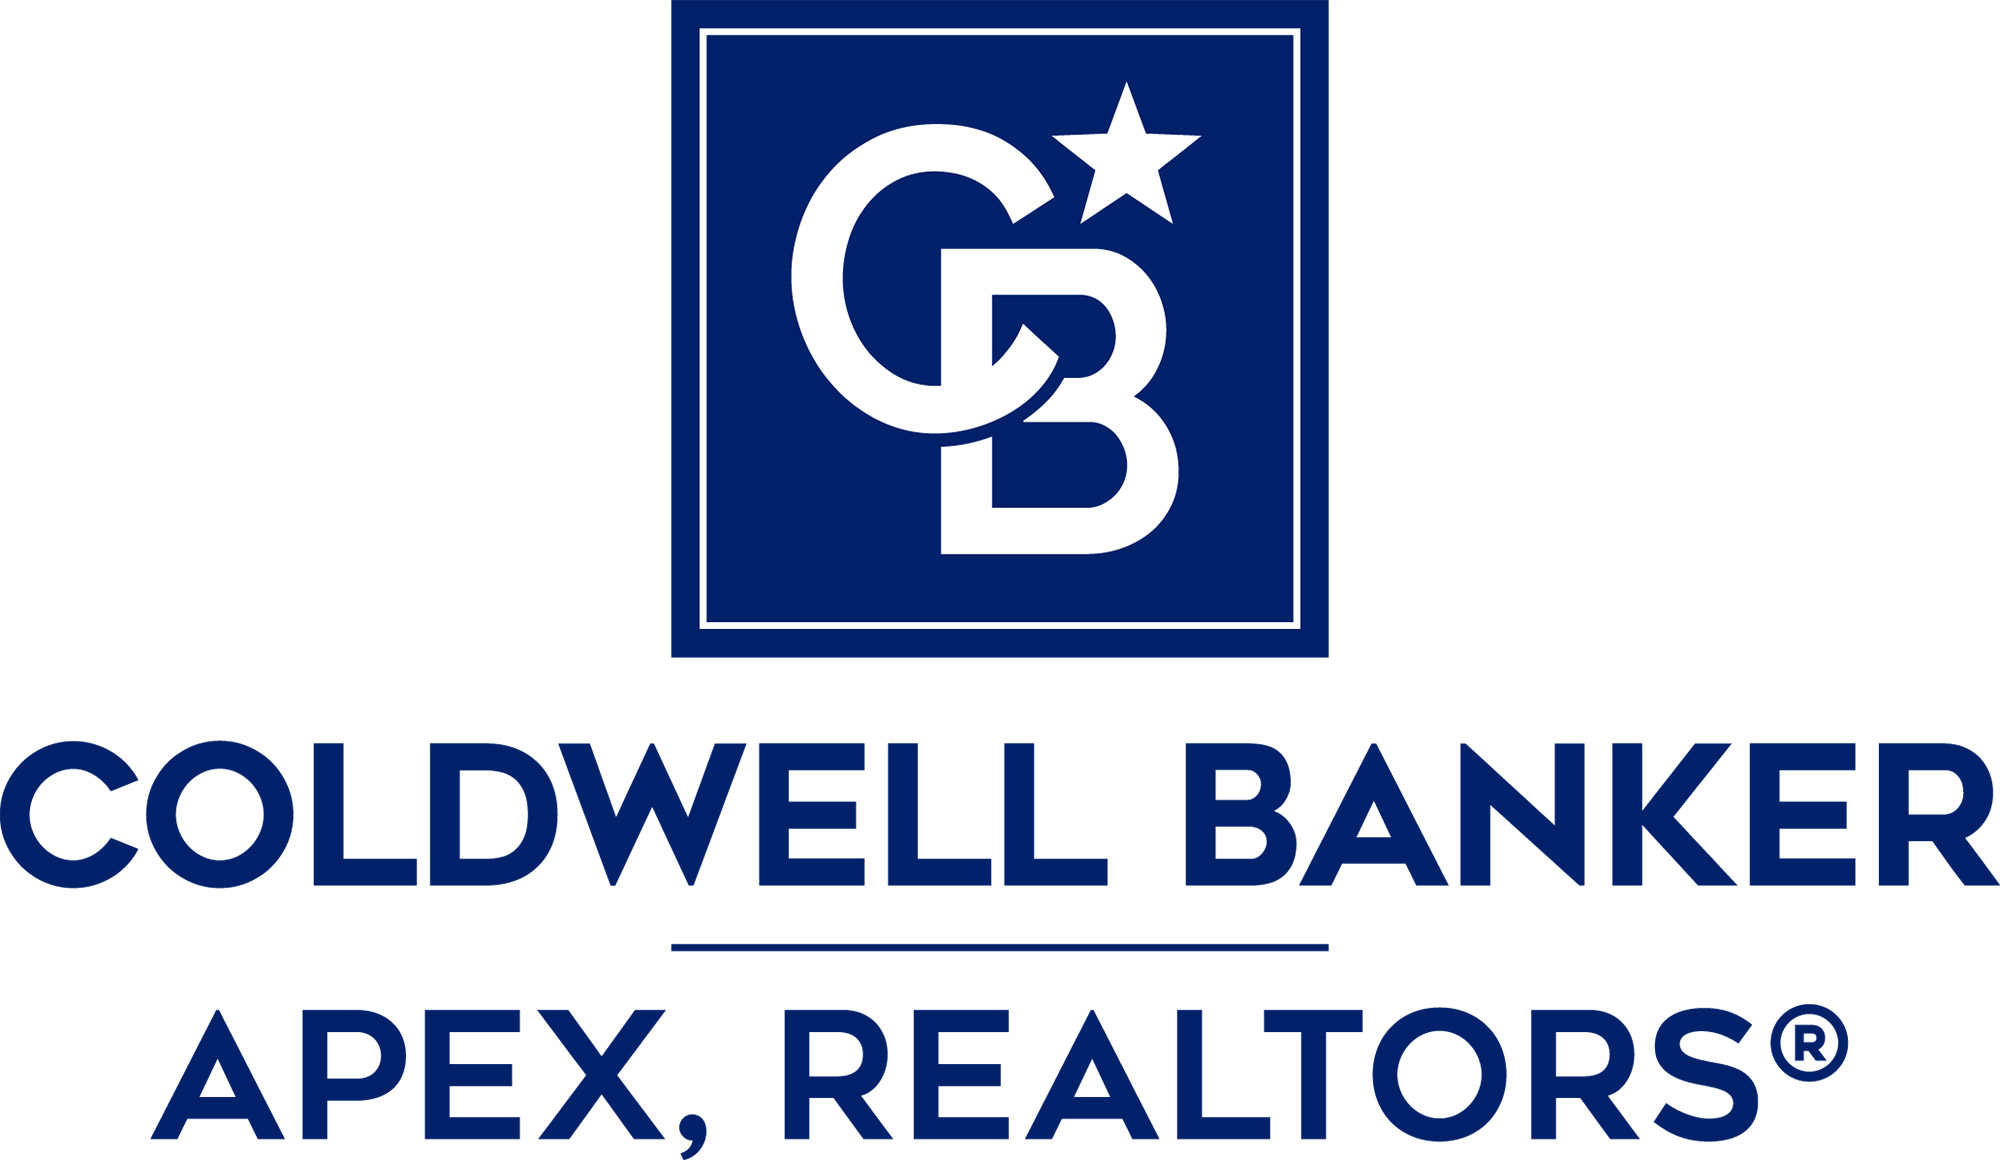 Joey Ruffino - Coldwell Banker AG Town Logo